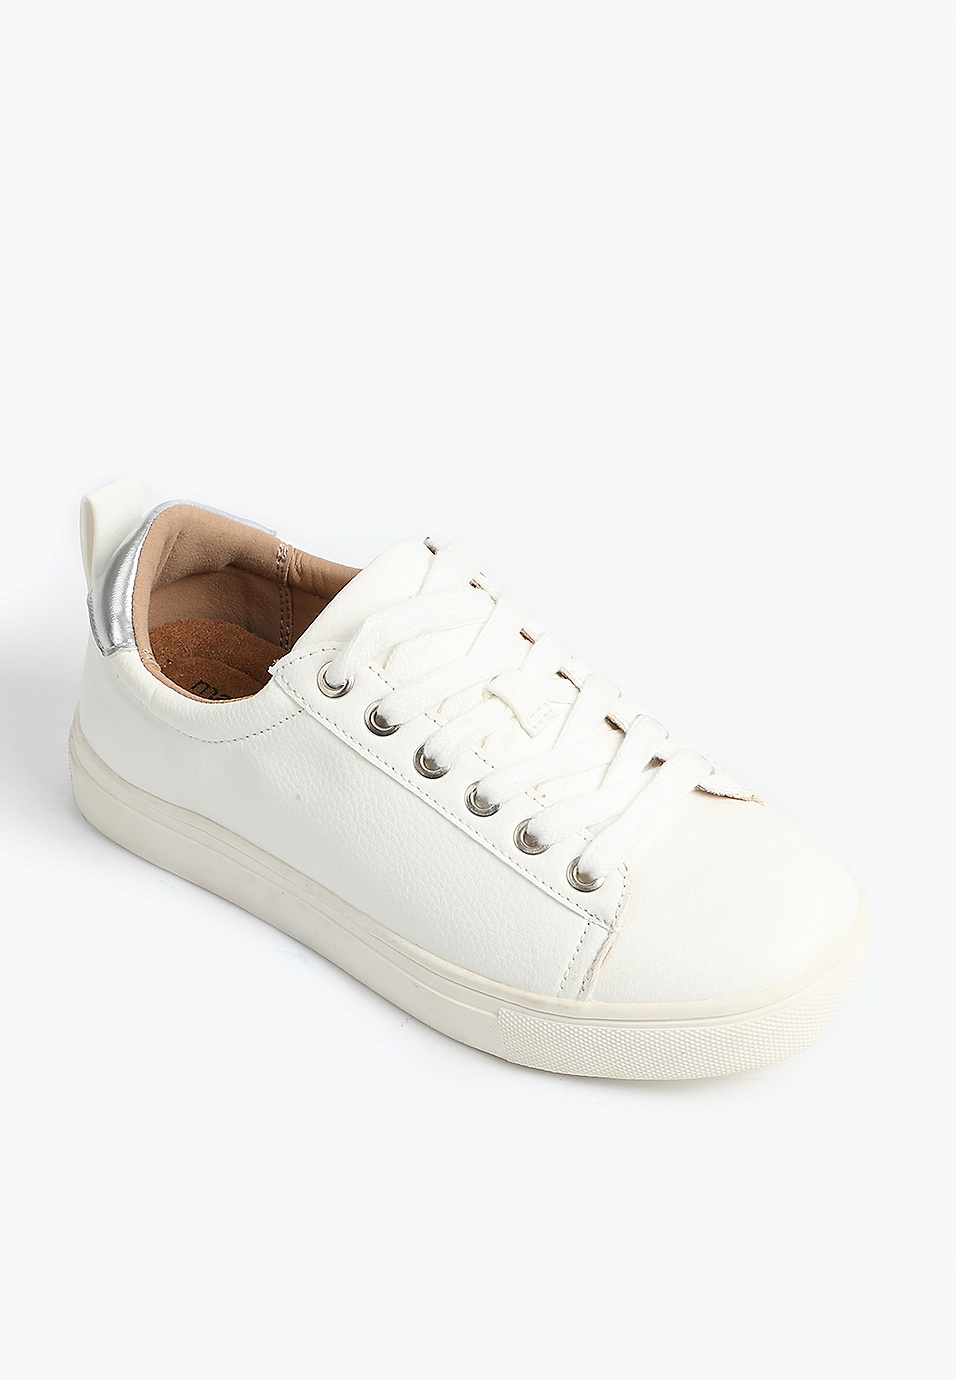 metallic-effect lace-up sneakers